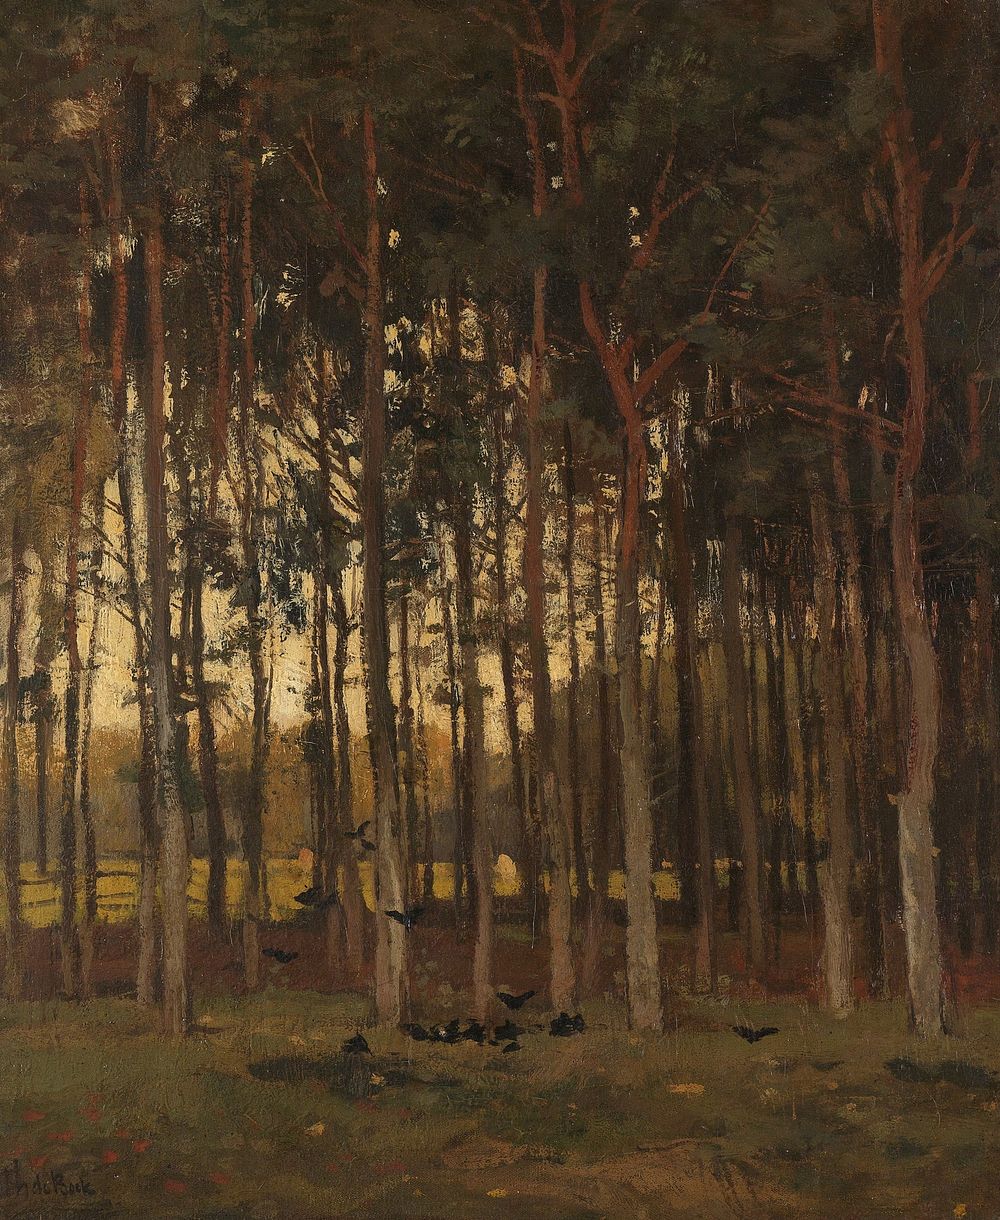 View in the Woods (c. 1870 - c. 1904) by Théophile de Bock